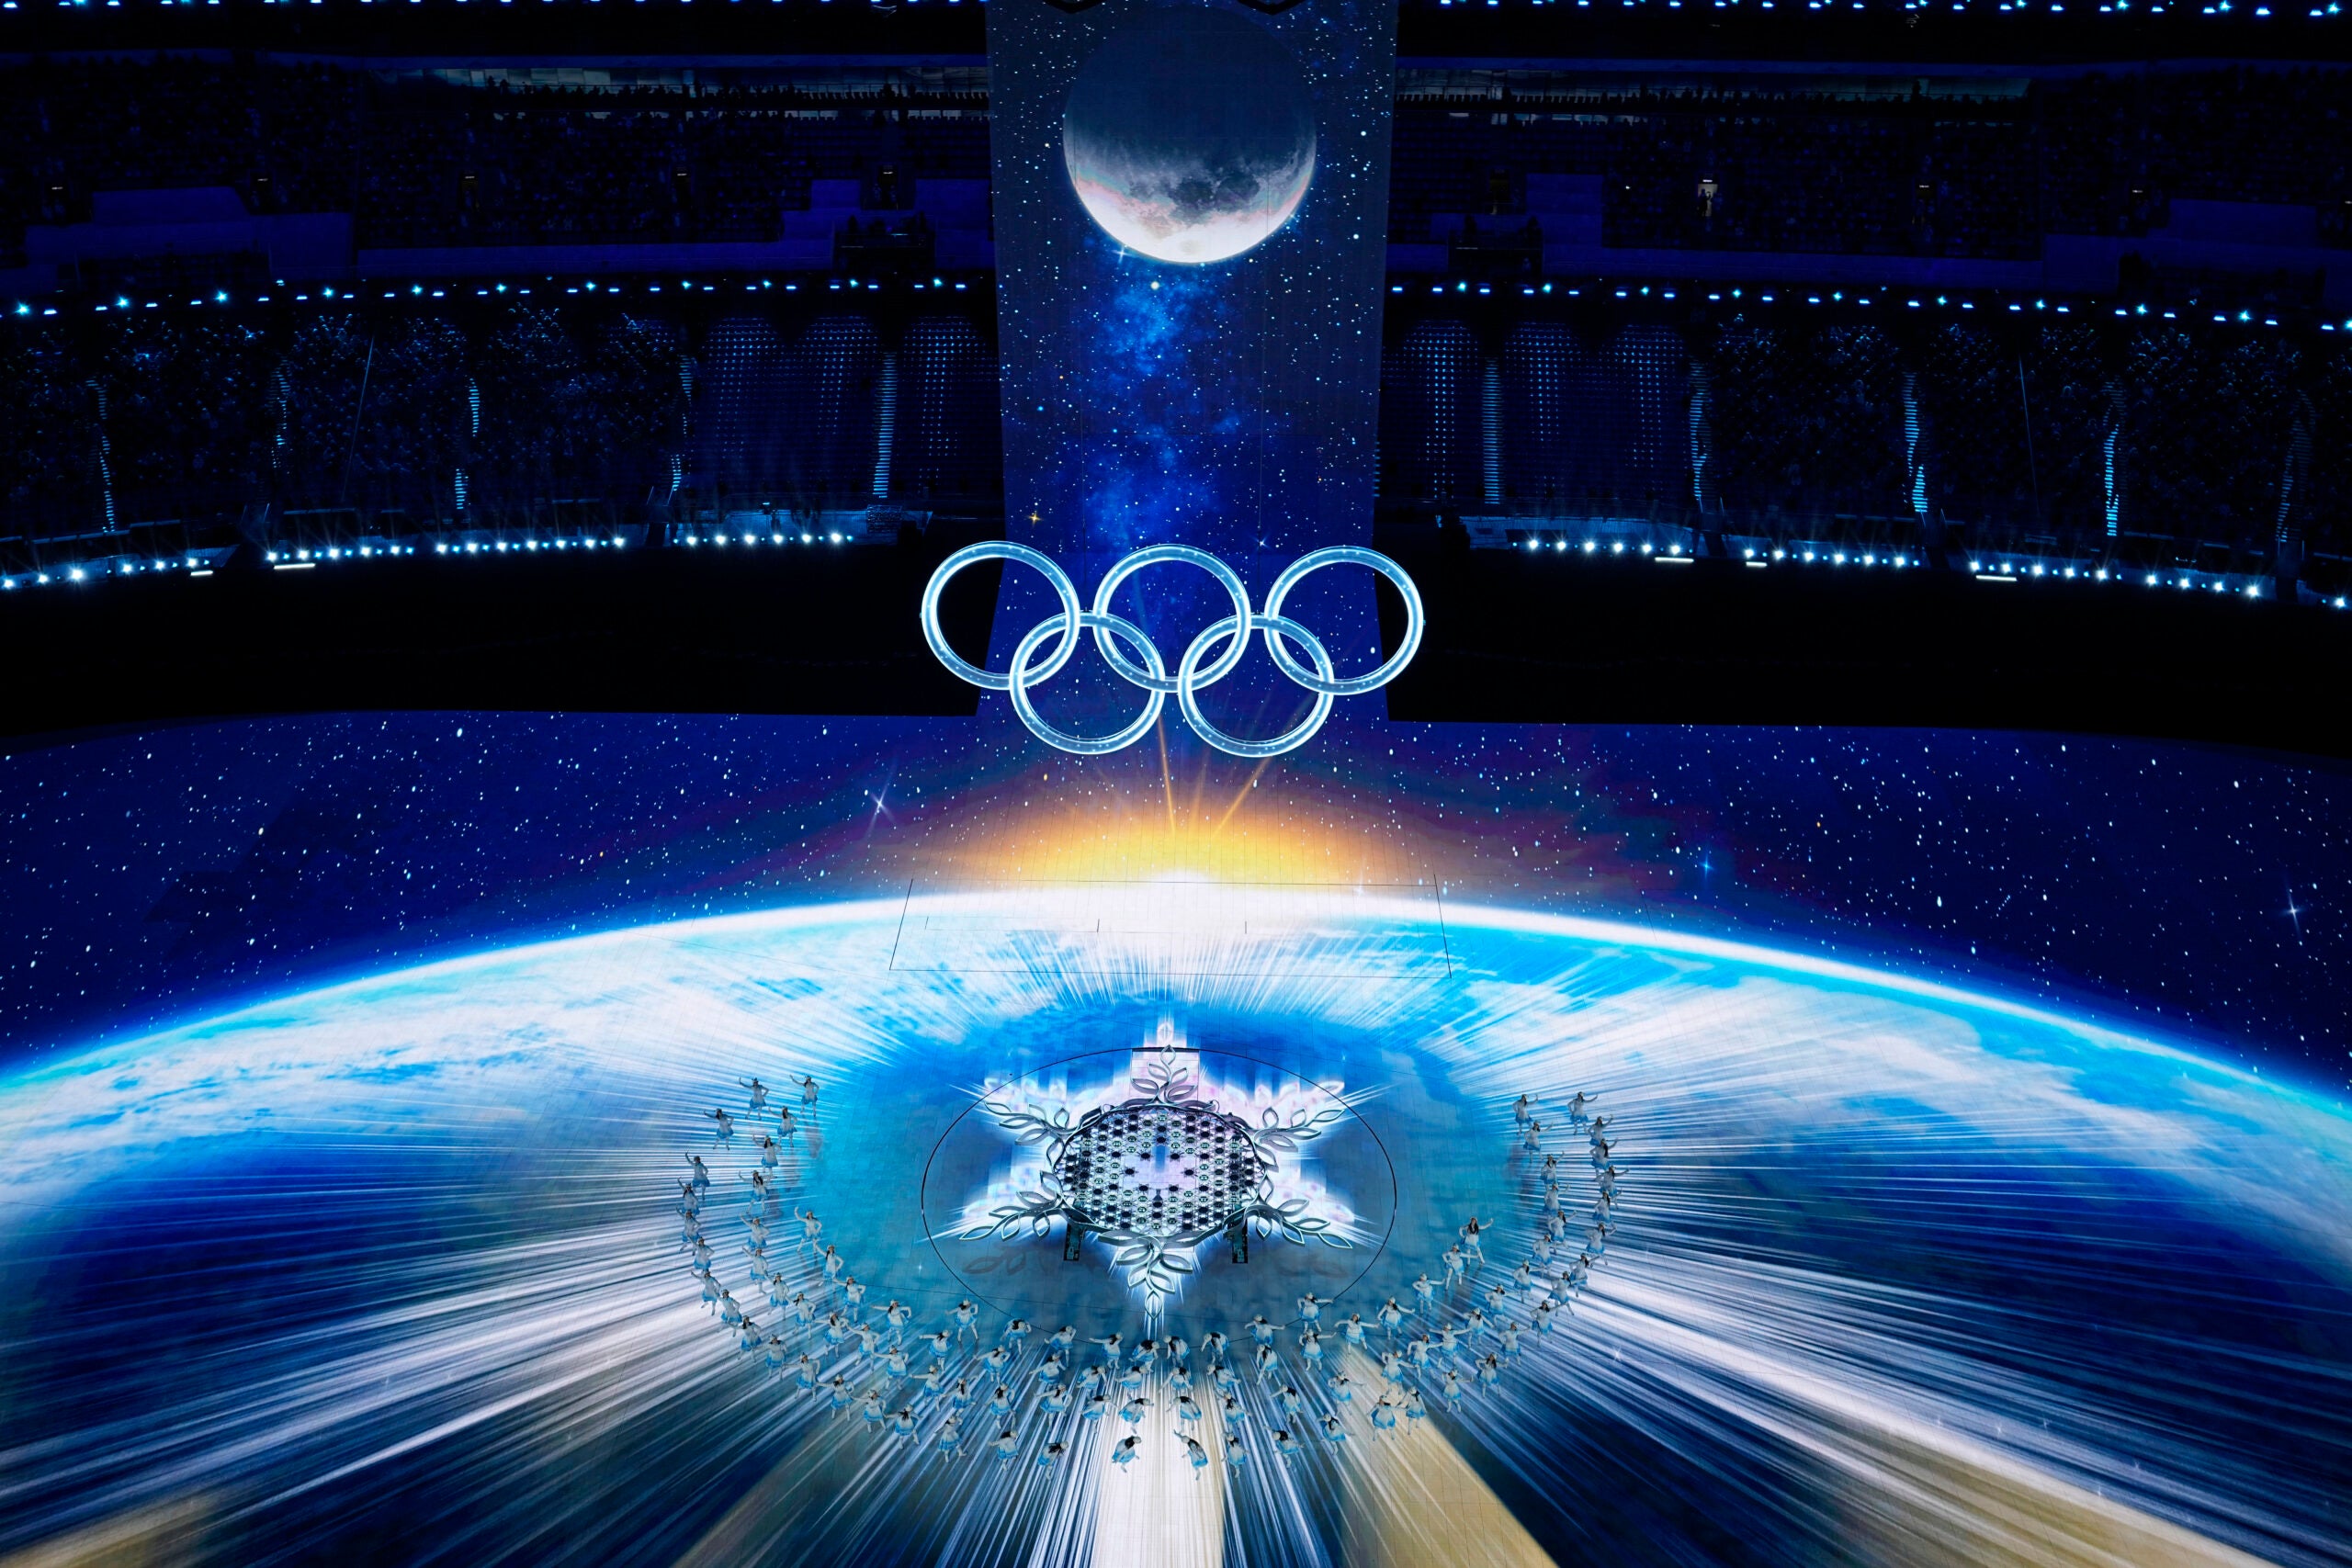 How The Order Of Countries In The Olympic Opening Ceremony Works